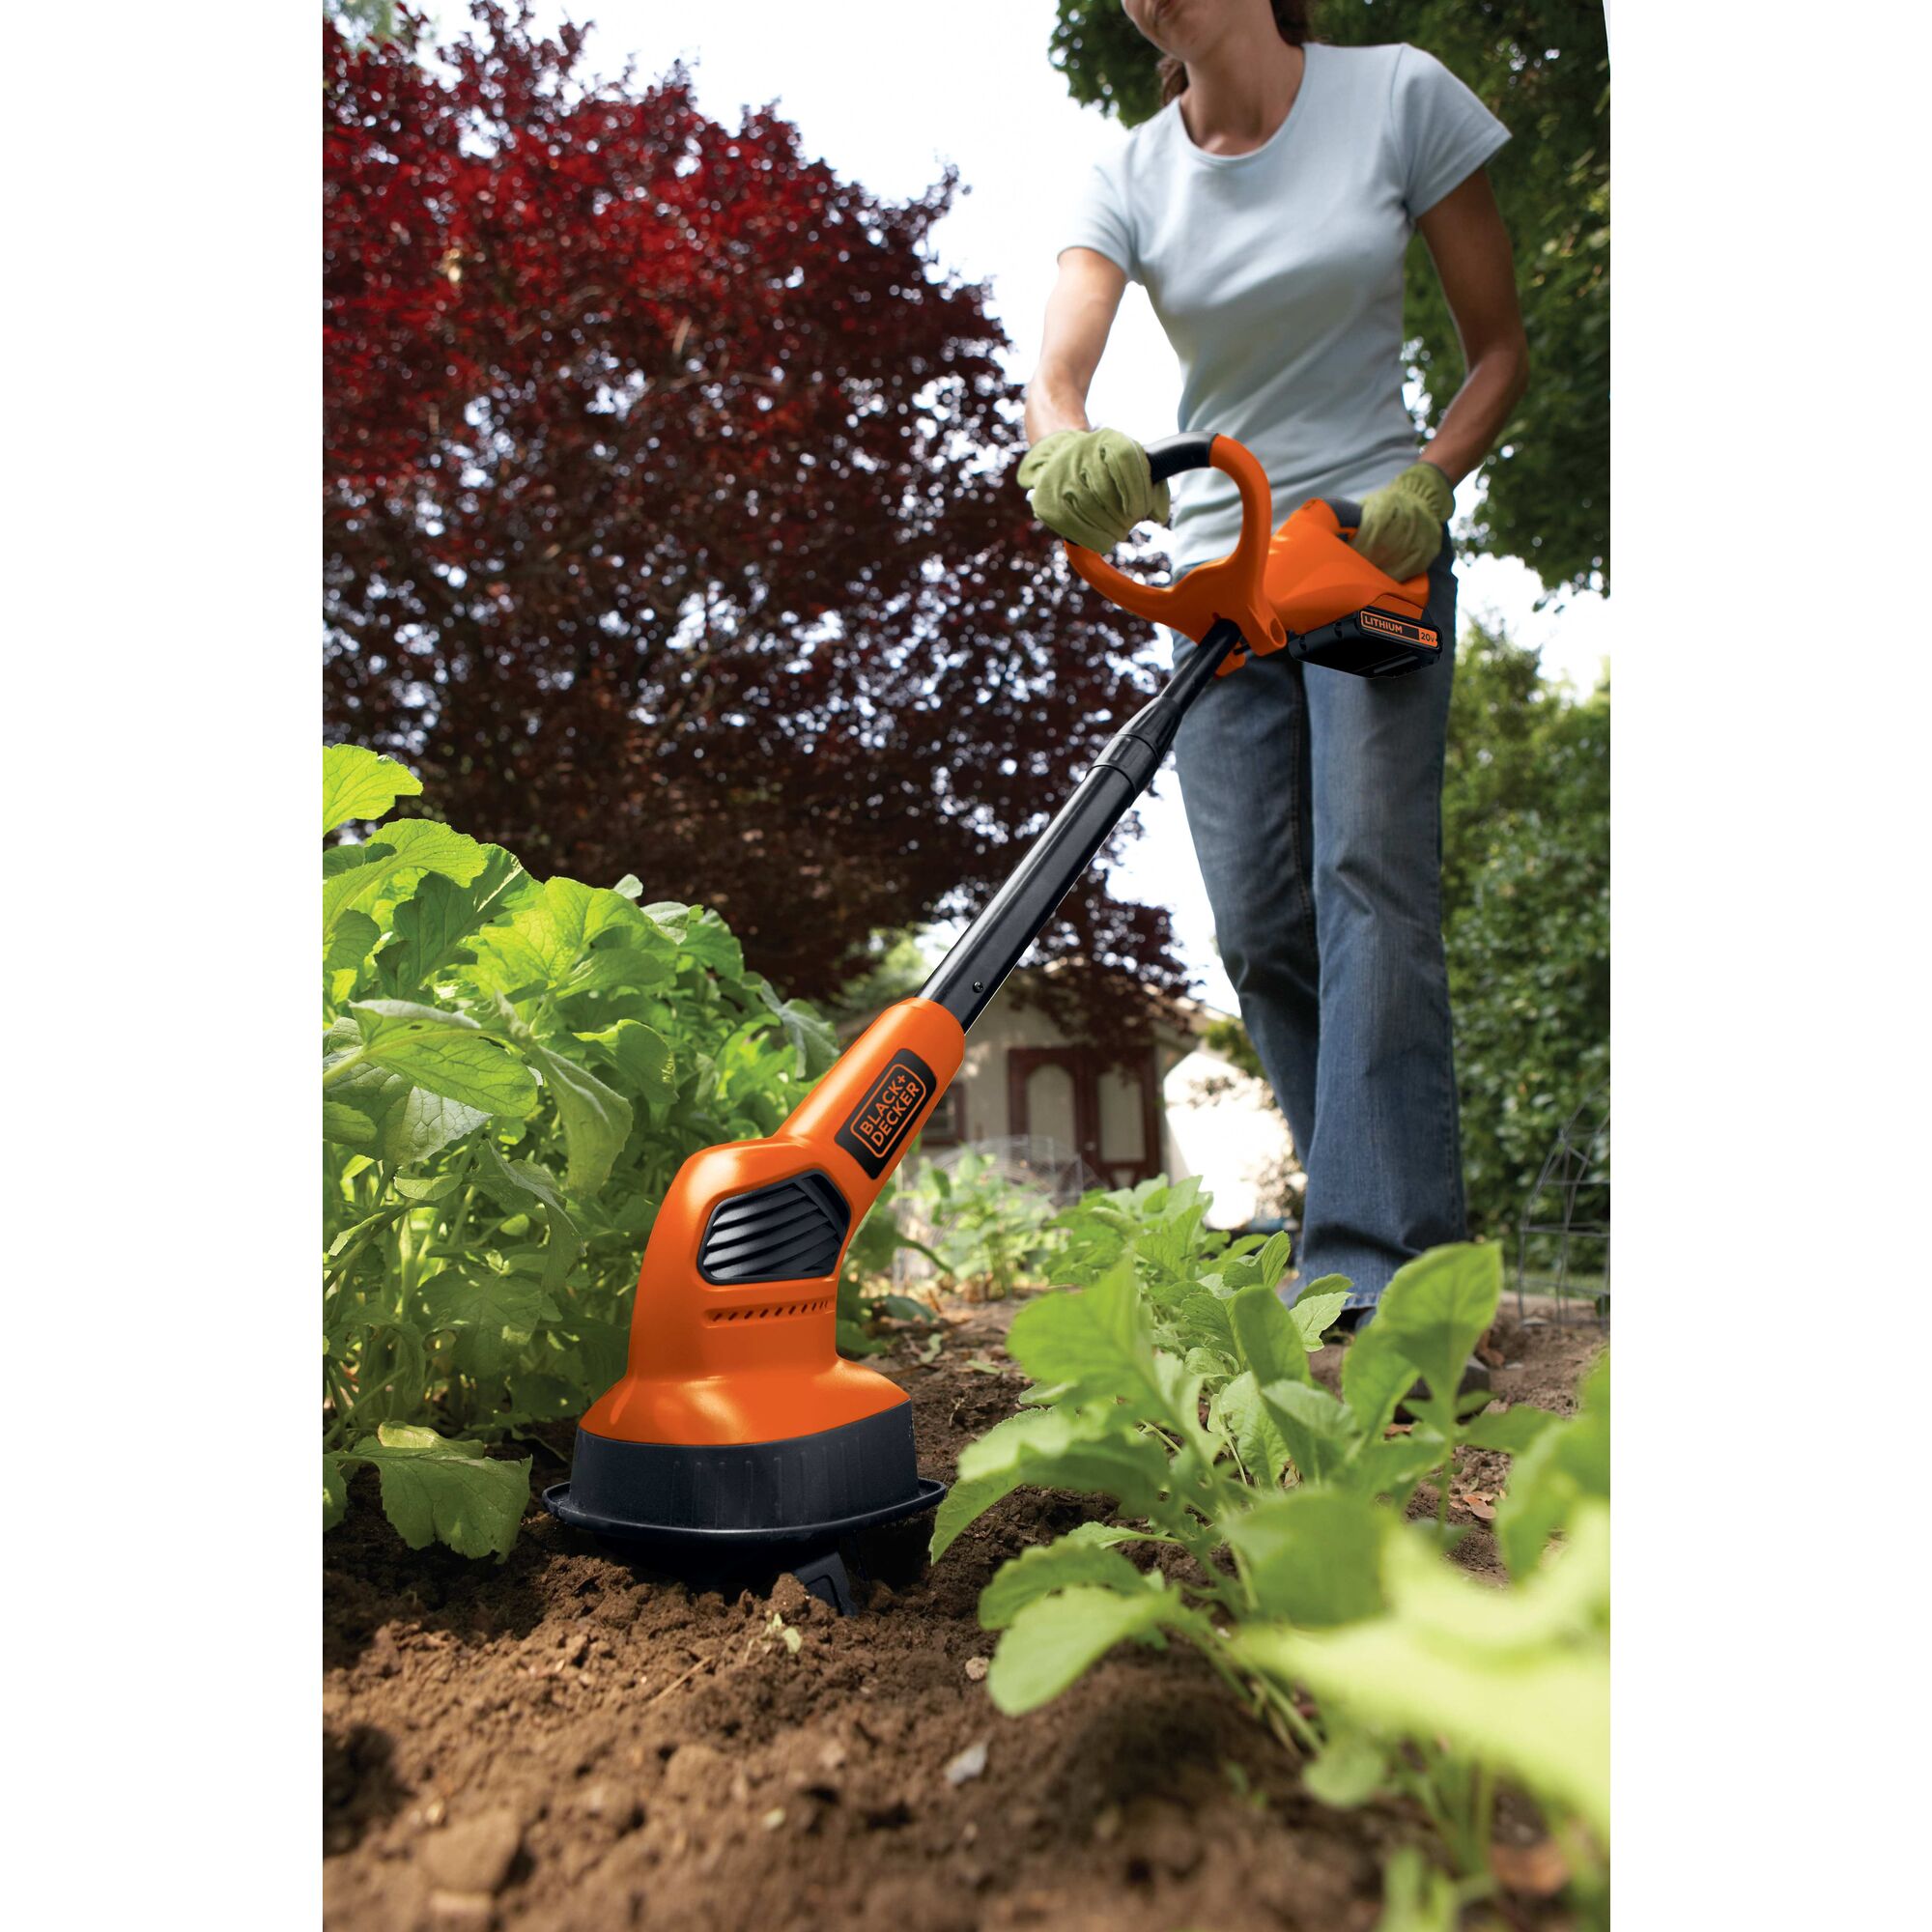 20 volt MAX Lithium garden cultivator being used by a person to cultivate land.